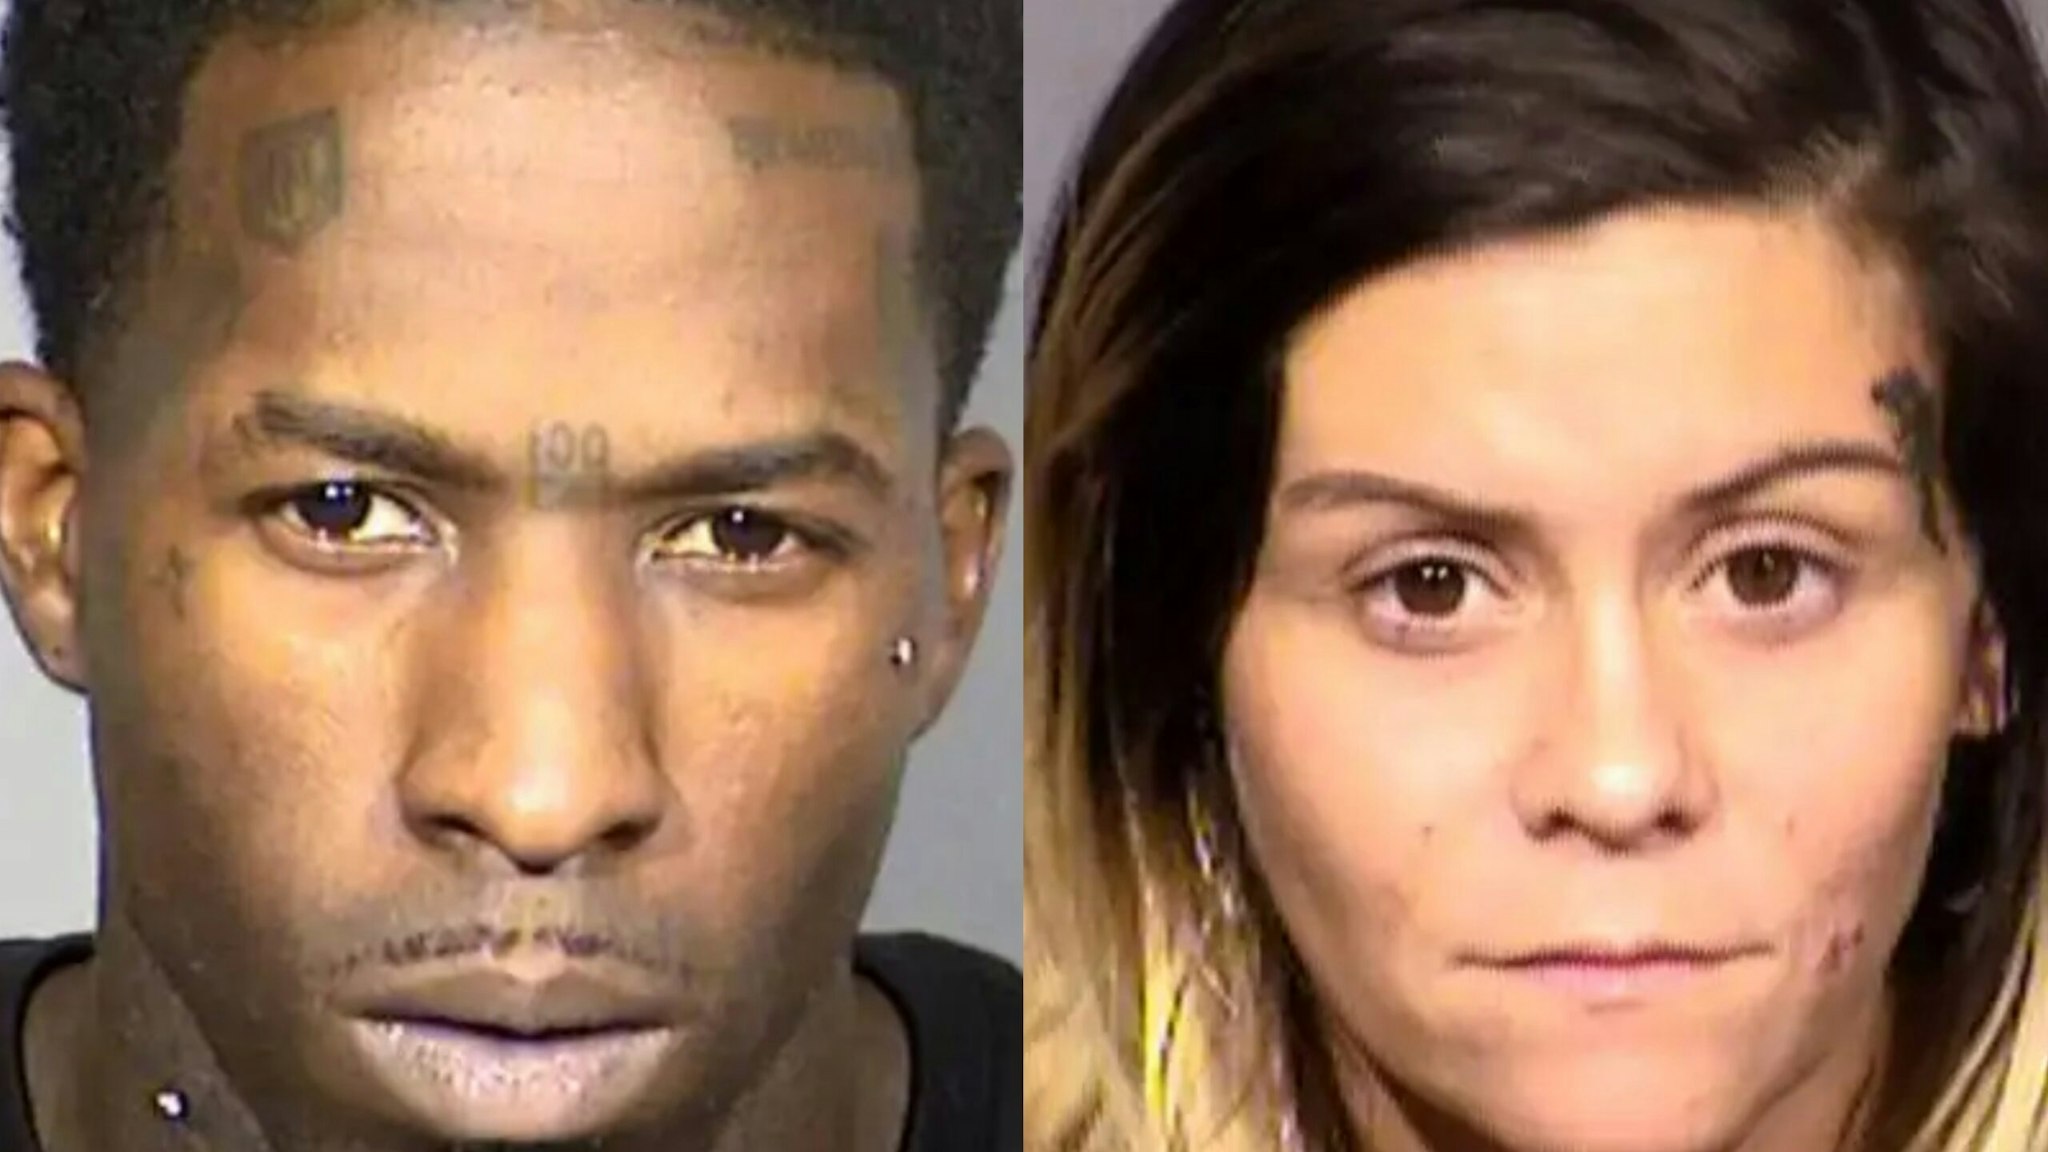 Travis Doss, 31, and his wife Amanda Stamper, 33, have been arrested for child abuse.